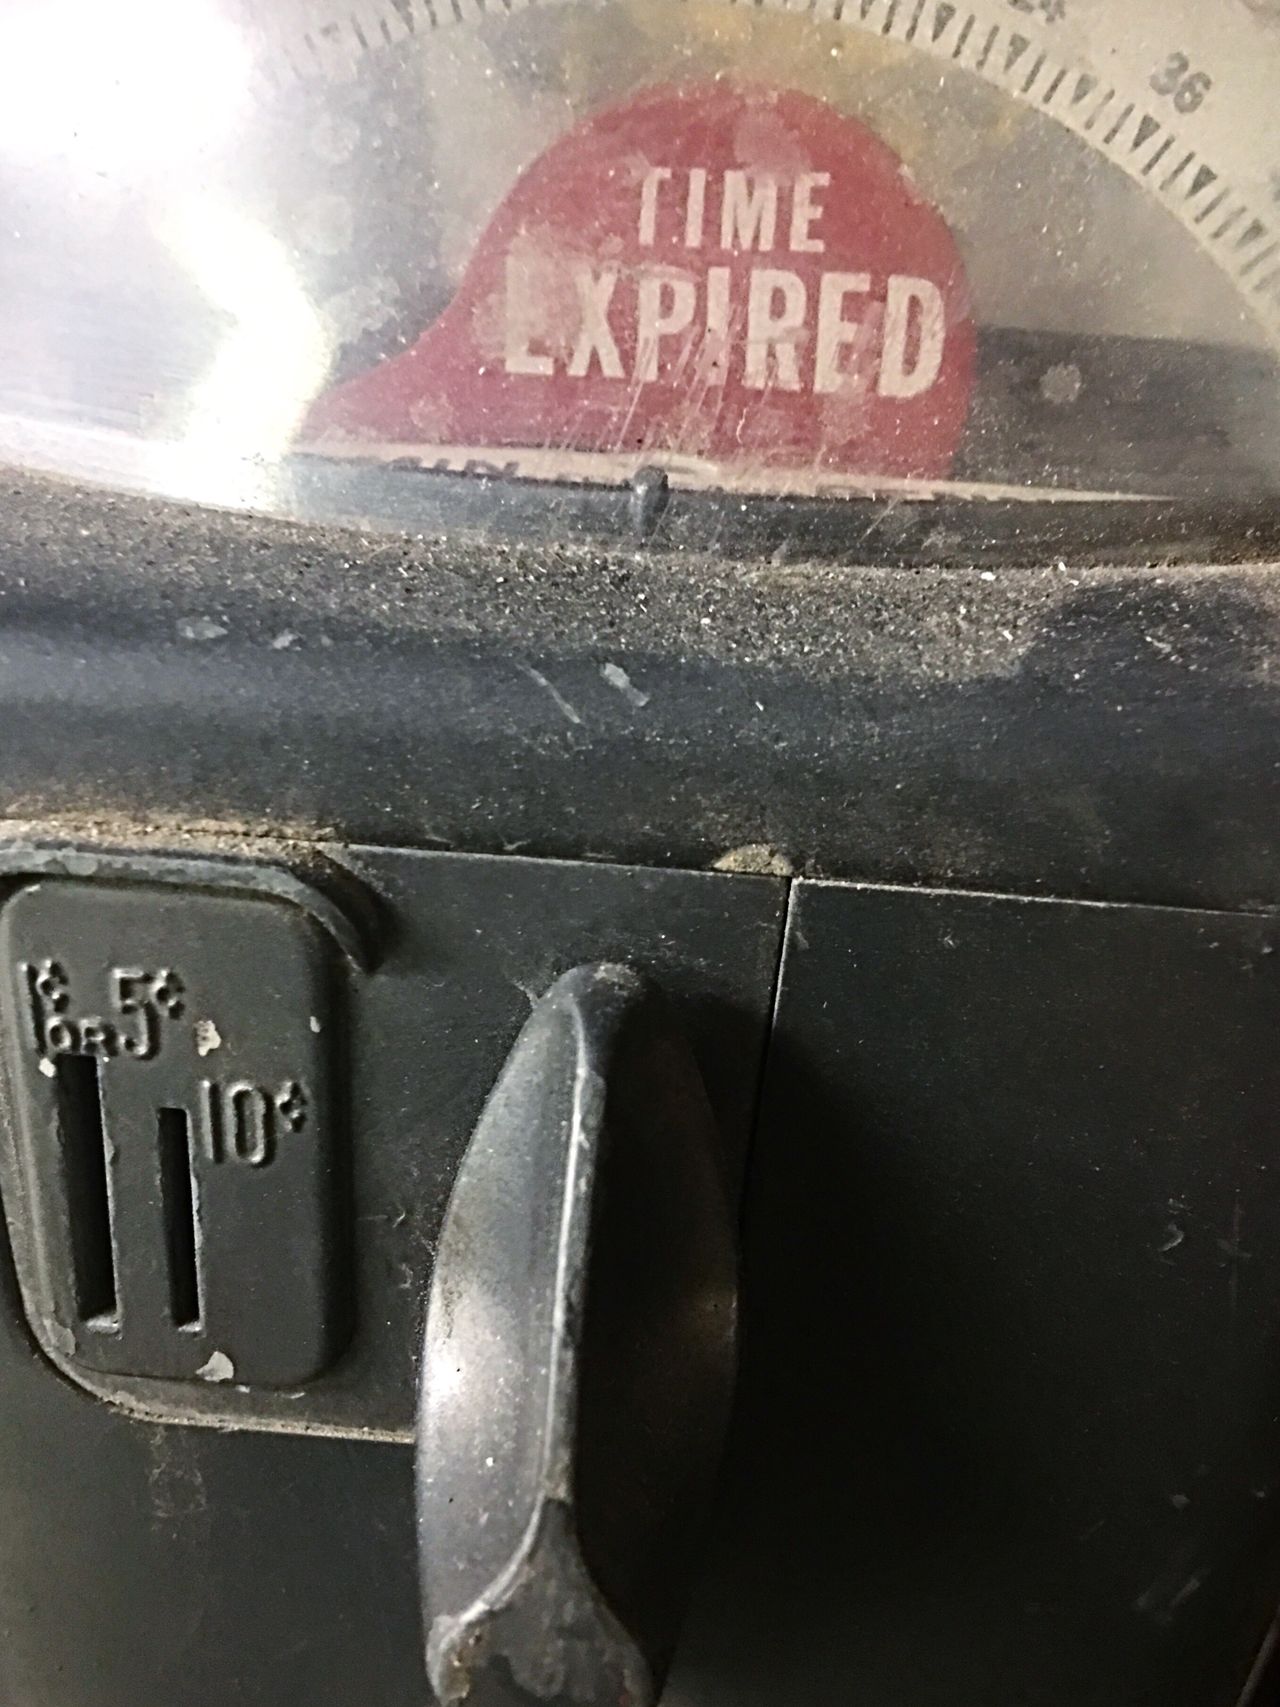 Time expired